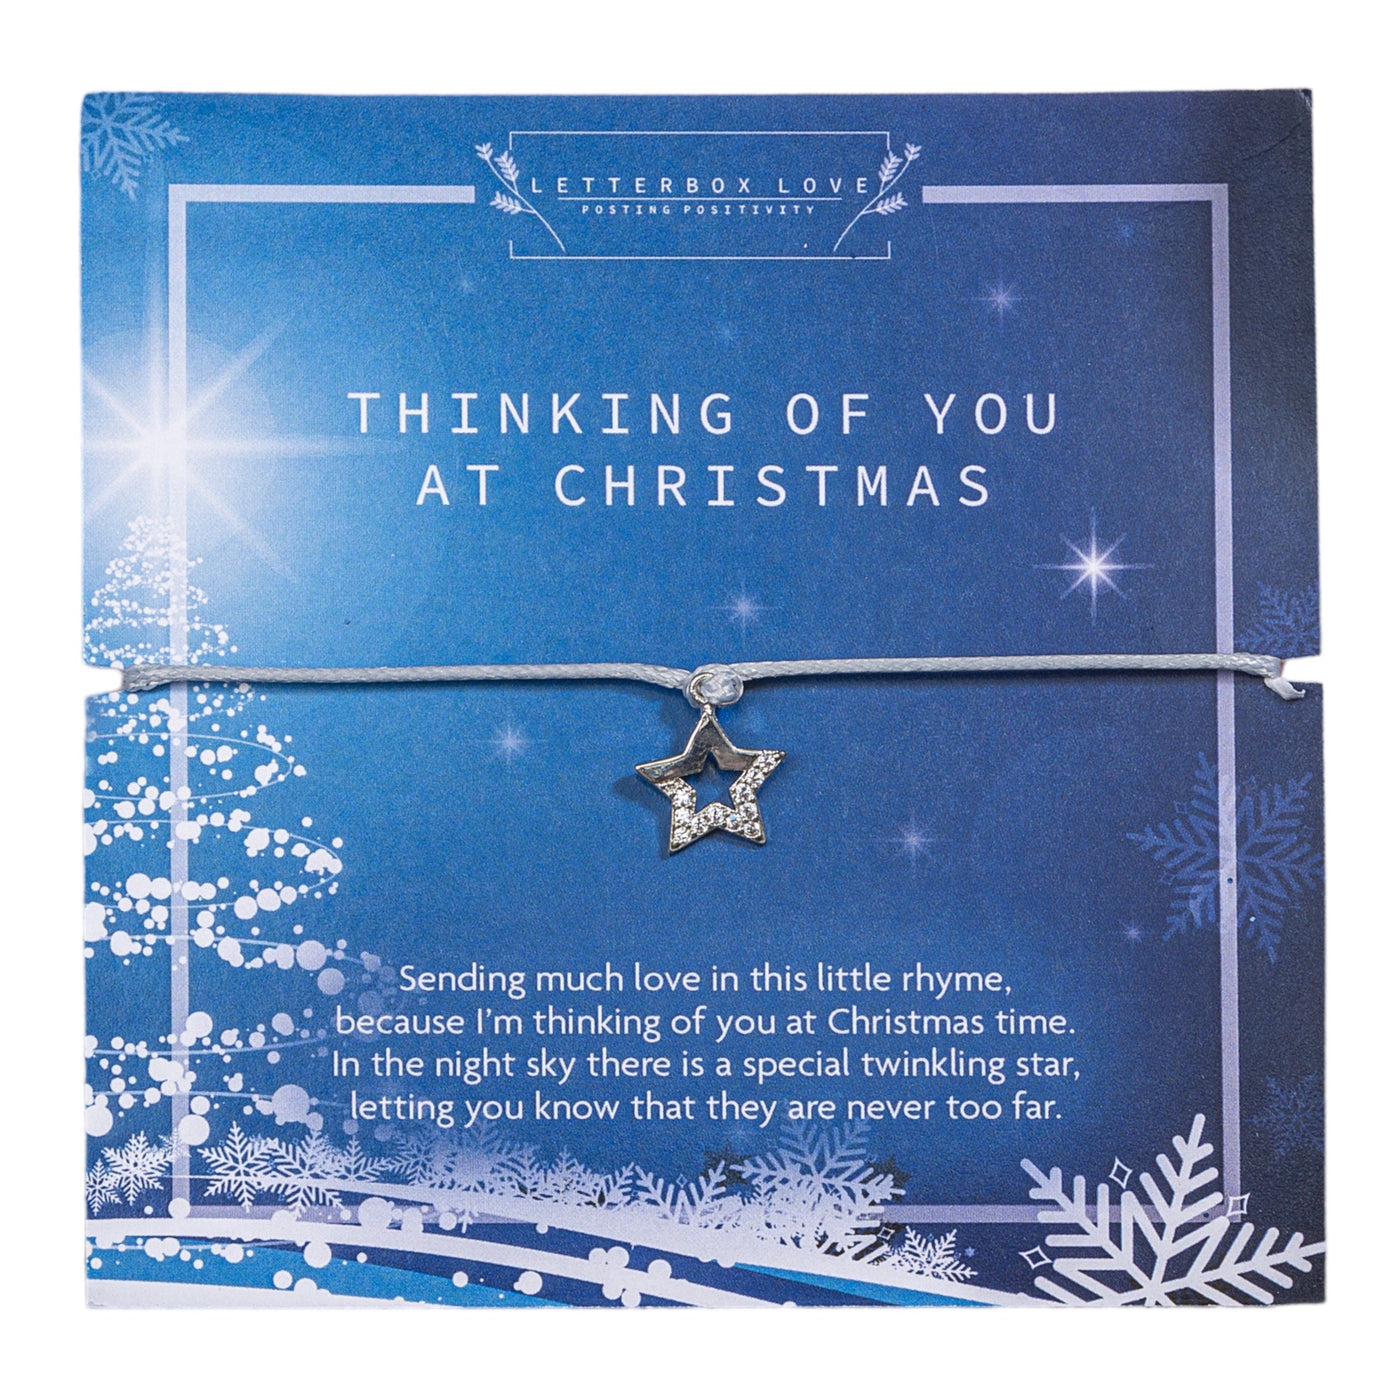 A festive Christmas card with a deep blue and white color scheme, featuring the message 'THINKING OF YOU AT CHRISTMAS' in elegant, capitalized white letters. The design includes sparkling stars, snowflakes, and an abstract Christmas tree, creating a wintry night sky effect. A star-shaped pendant with a glittering stone in the center is tied to the front of the card, adding a touch of sparkle. 